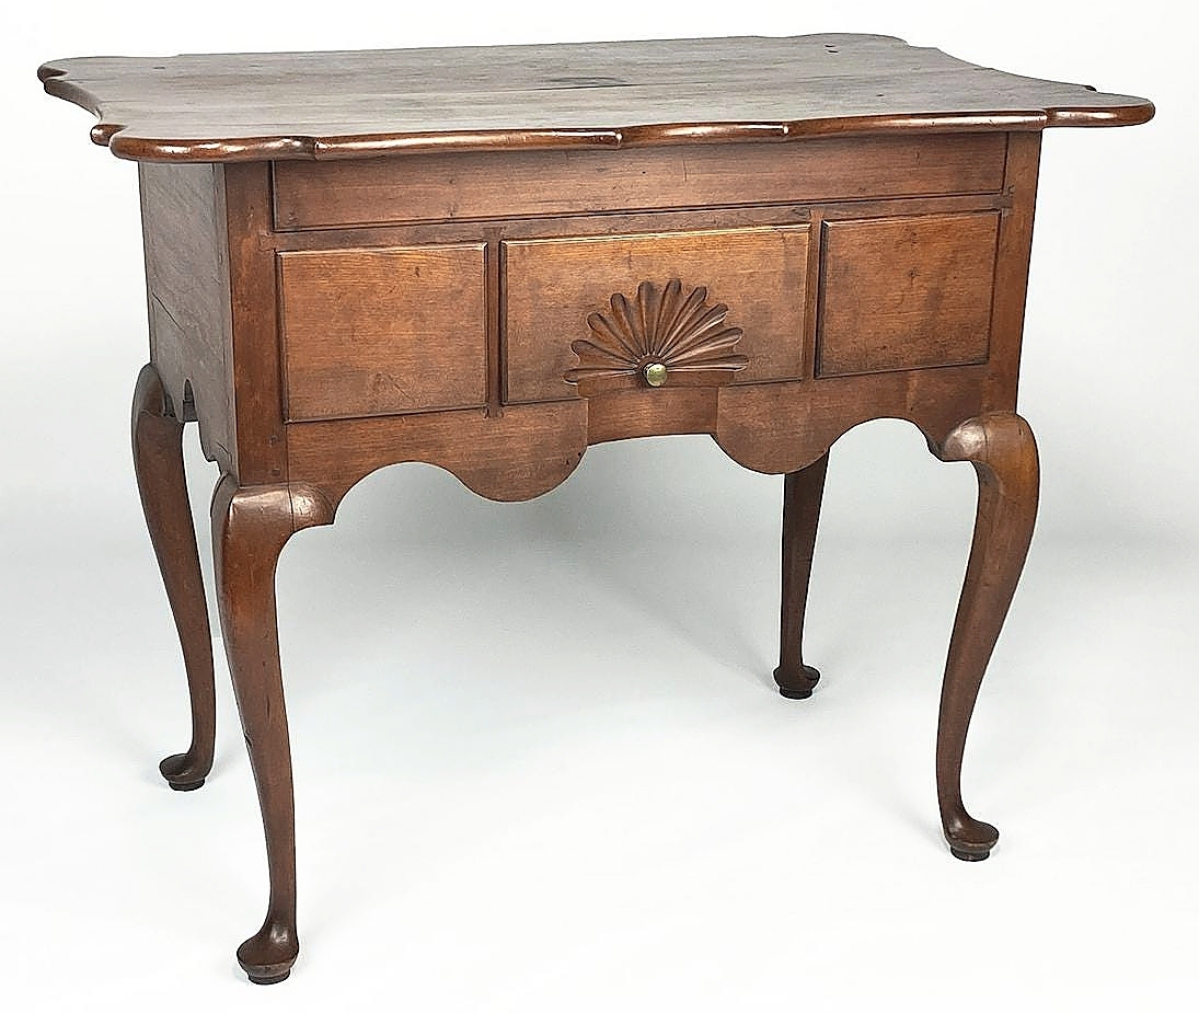 A Queen Anne scalloped top dressing table, probably from Wethersfield, Conn., led the selection of American furniture, both in terms of dollars achieved, $40,260, and in presale interest. Scalloped top examples are exceedingly rare, with perhaps fewer than a dozen examples known.